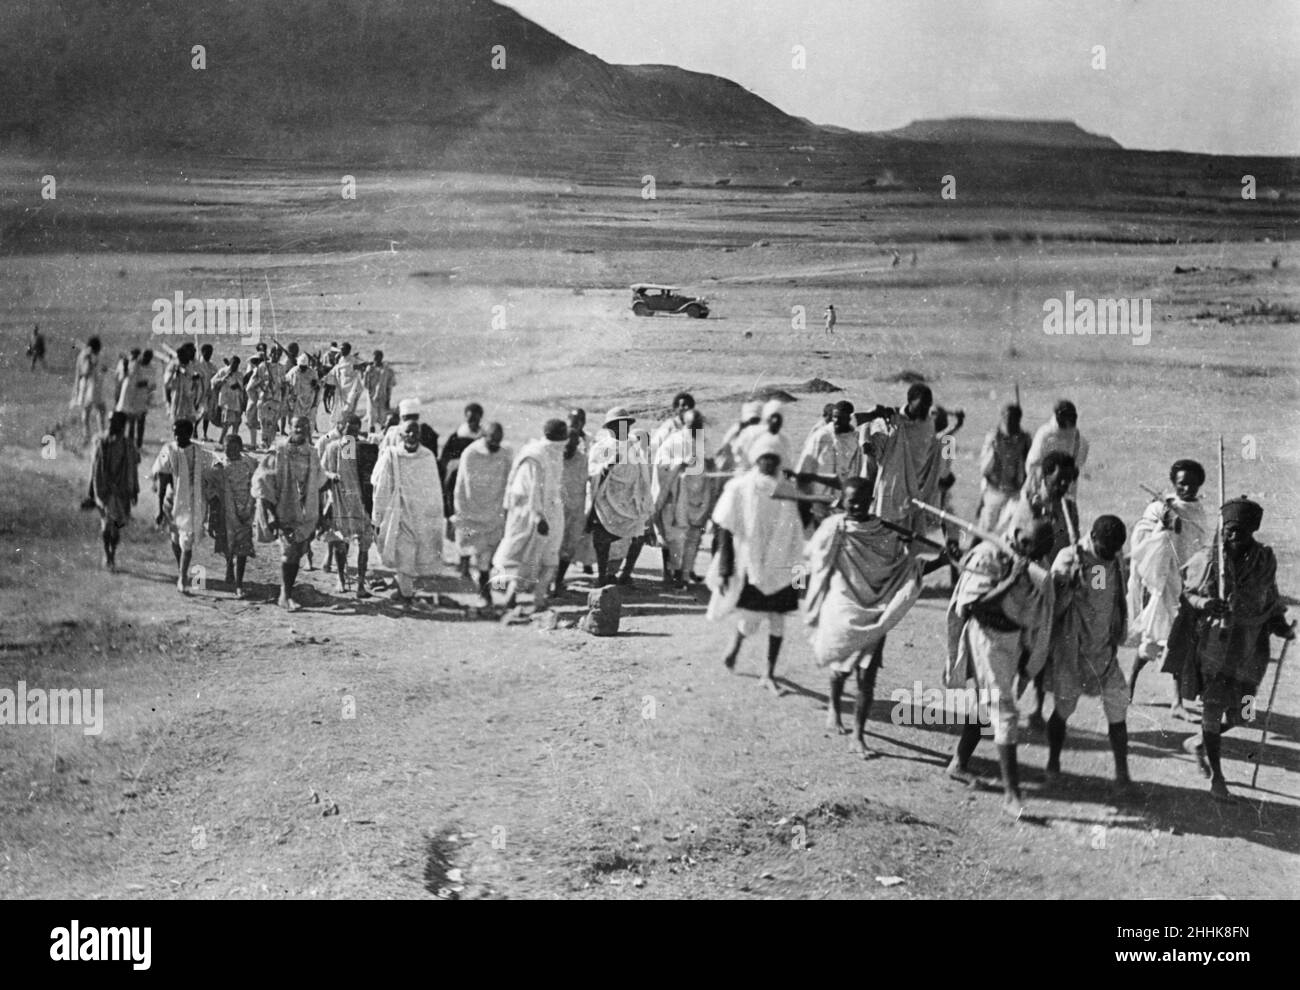 Abyssinian War October 1935Members of the Abyssinian peasant army retreat to Makale as the Italian forces in northern Abyssinia advance Stock Photo